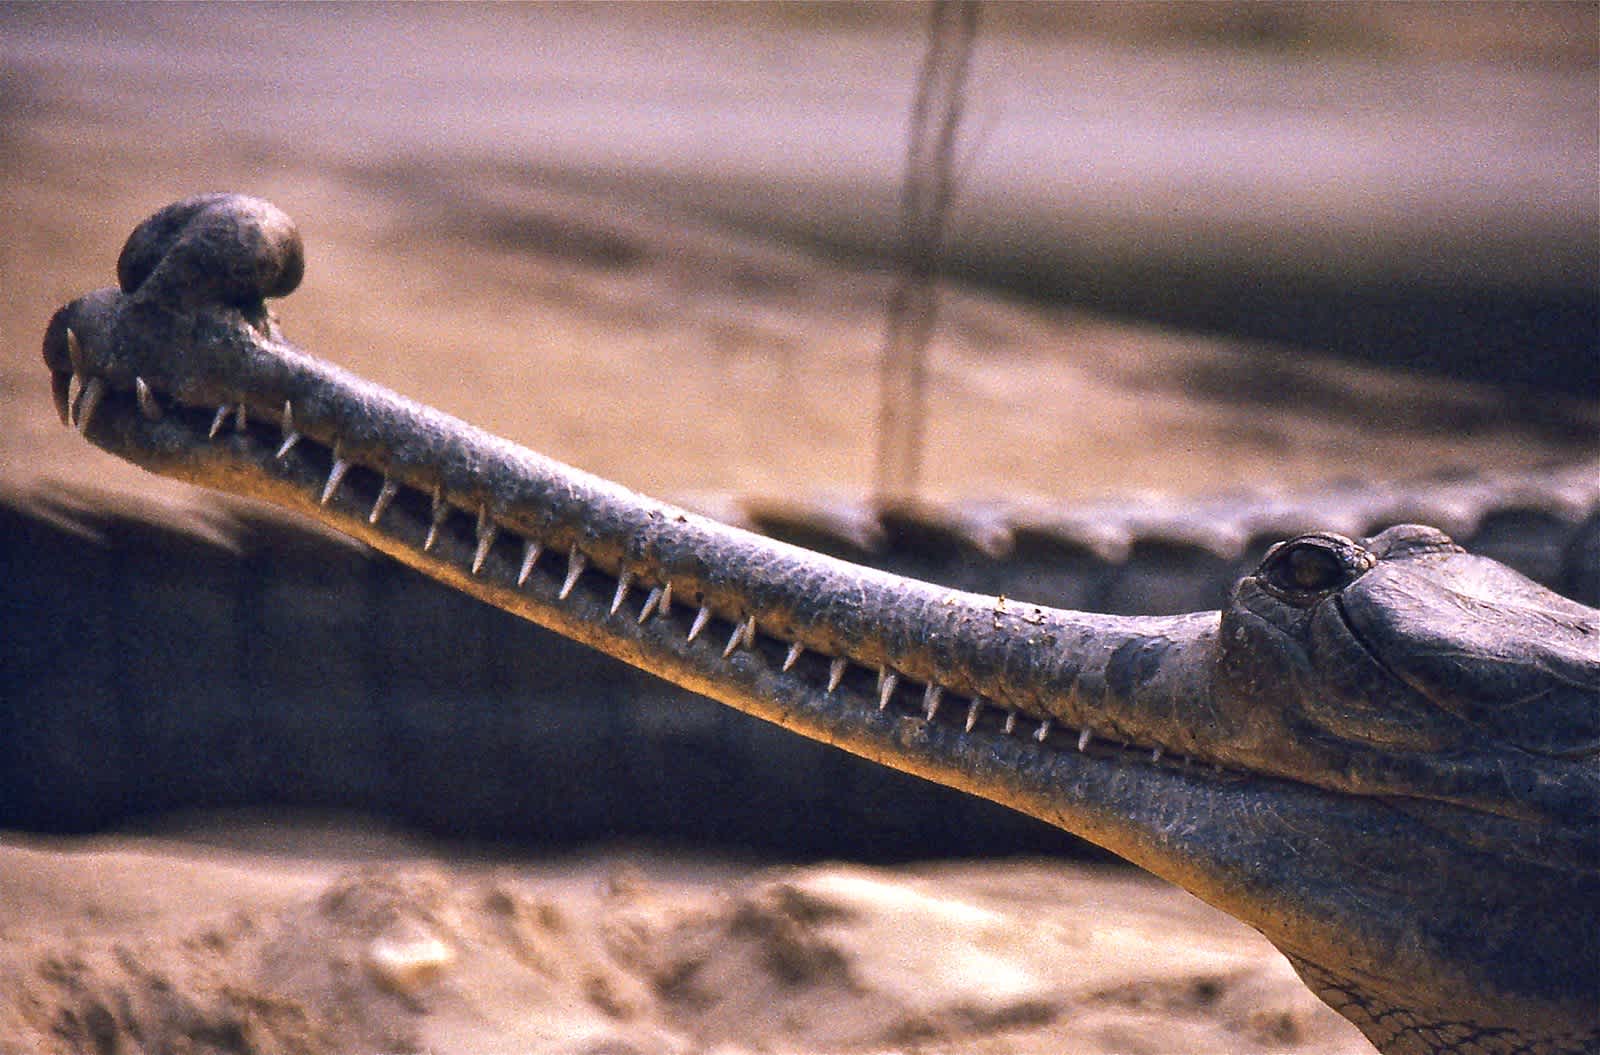 Image of Gharial Alligator with long pointy snout